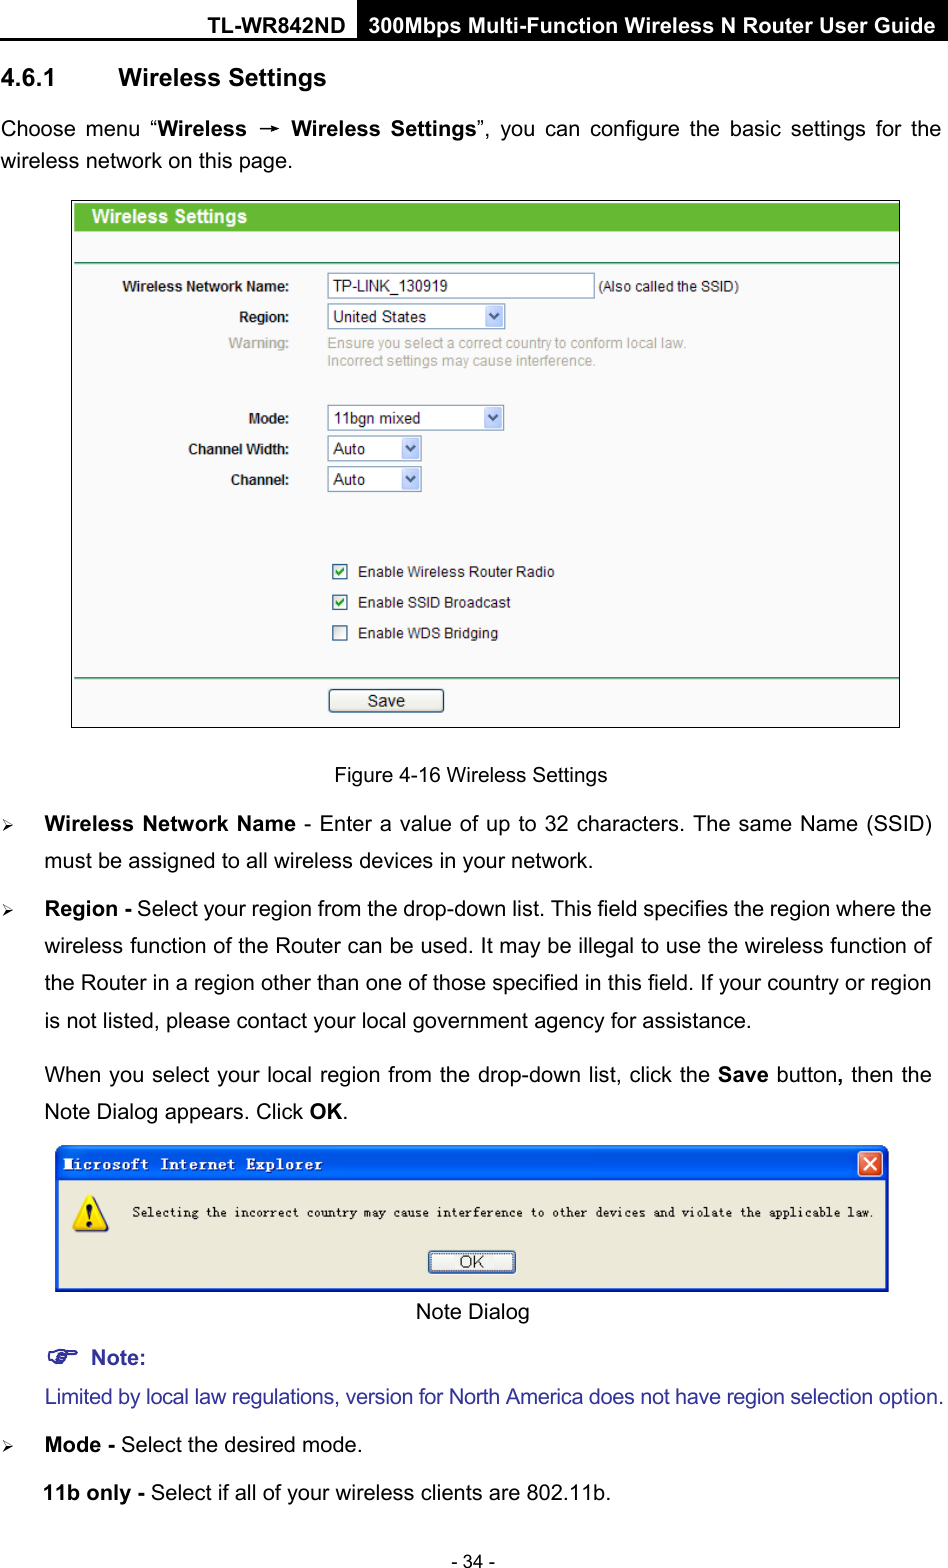 TL-WR842ND 300Mbps Multi-Function Wireless N Router User Guide  - 34 - 4.6.1 Wireless Settings Choose menu “Wireless → Wireless Settings”, you can configure the basic settings for the wireless network on this page.  Figure 4-16 Wireless Settings  Wireless Network Name - Enter a value of up to 32 characters. The same Name (SSID) must be assigned to all wireless devices in your network.  Region - Select your region from the drop-down list. This field specifies the region where the wireless function of the Router can be used. It may be illegal to use the wireless function of the Router in a region other than one of those specified in this field. If your country or region is not listed, please contact your local government agency for assistance. When you select your local region from the drop-down list, click the Save button, then the Note Dialog appears. Click OK.  Note Dialog    Note: Limited by local law regulations, version for North America does not have region selection option.  Mode - Select the desired mode.   11b only - Select if all of your wireless clients are 802.11b. 